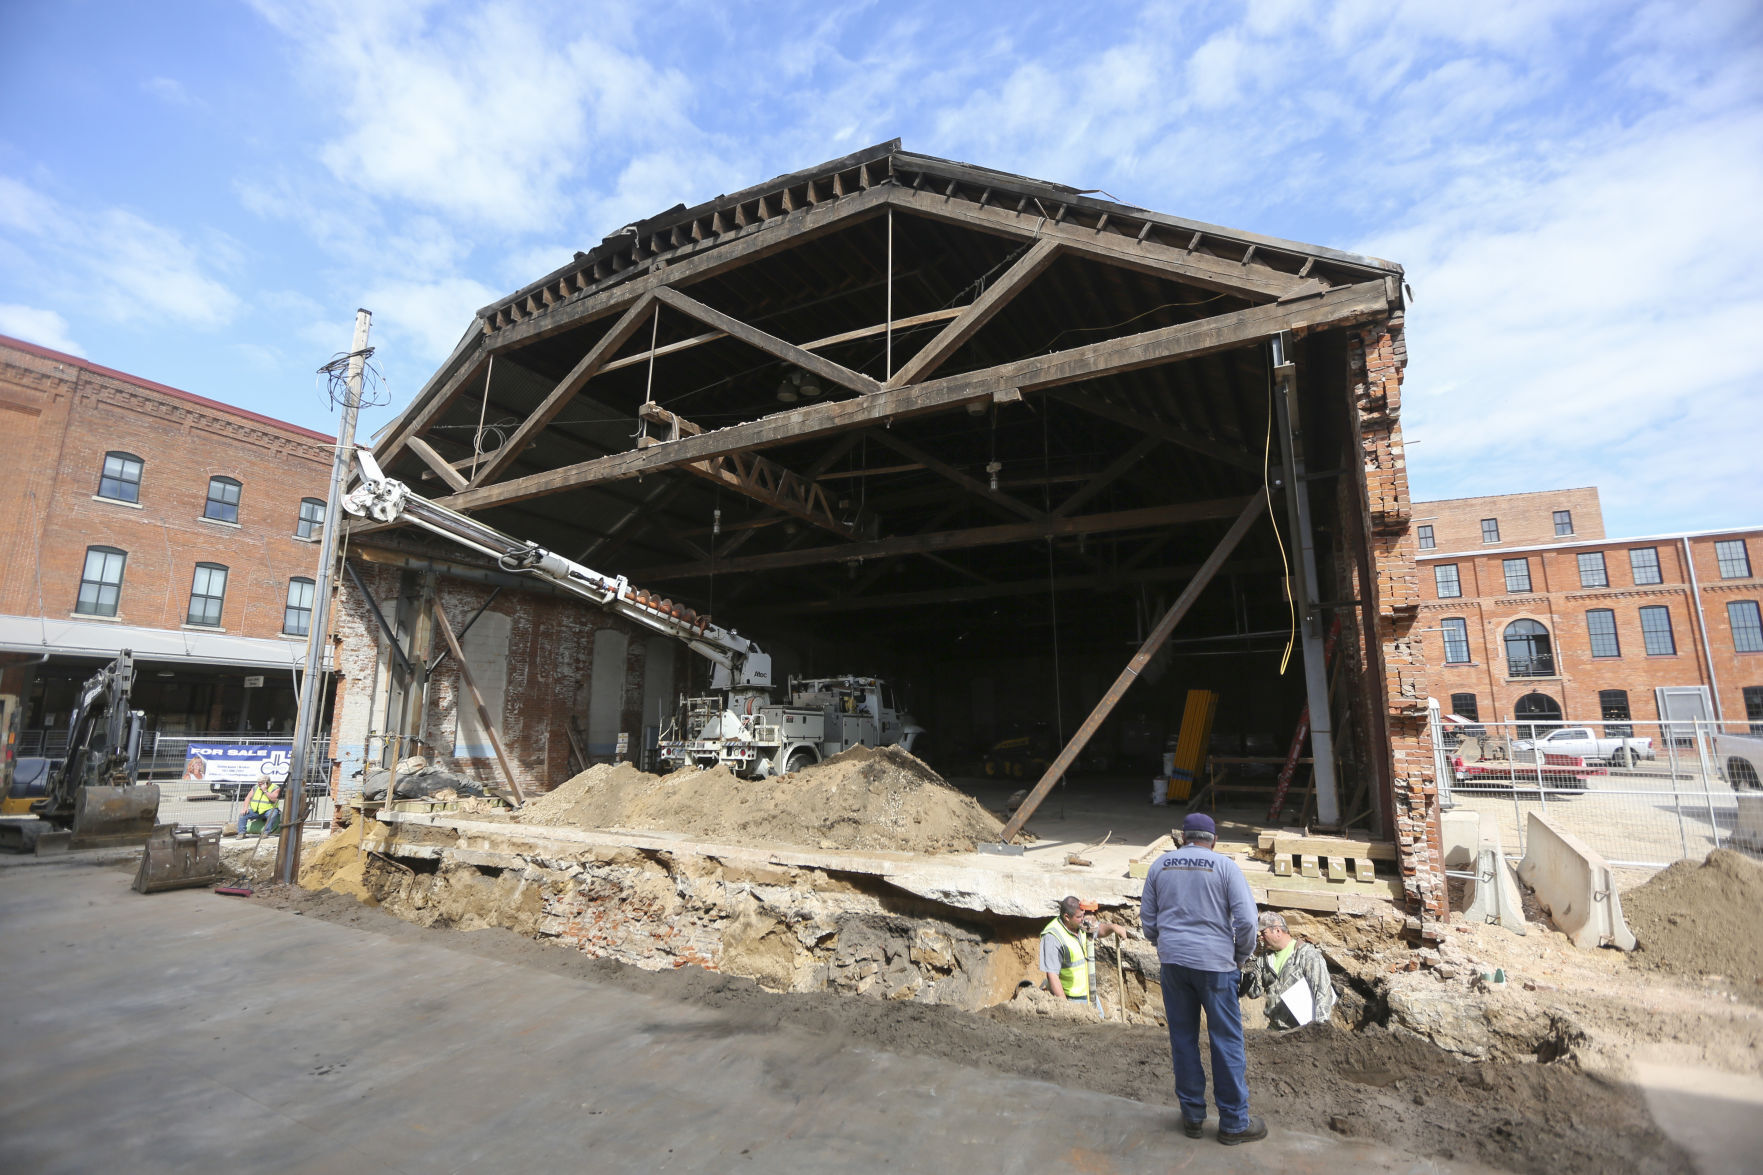 Crews work on the Rouse & Dean Foundry building, a historic structure being redeveloped at the corner of Washington and East 10th streets in Dubuque. PHOTO CREDIT: Dave Kettering